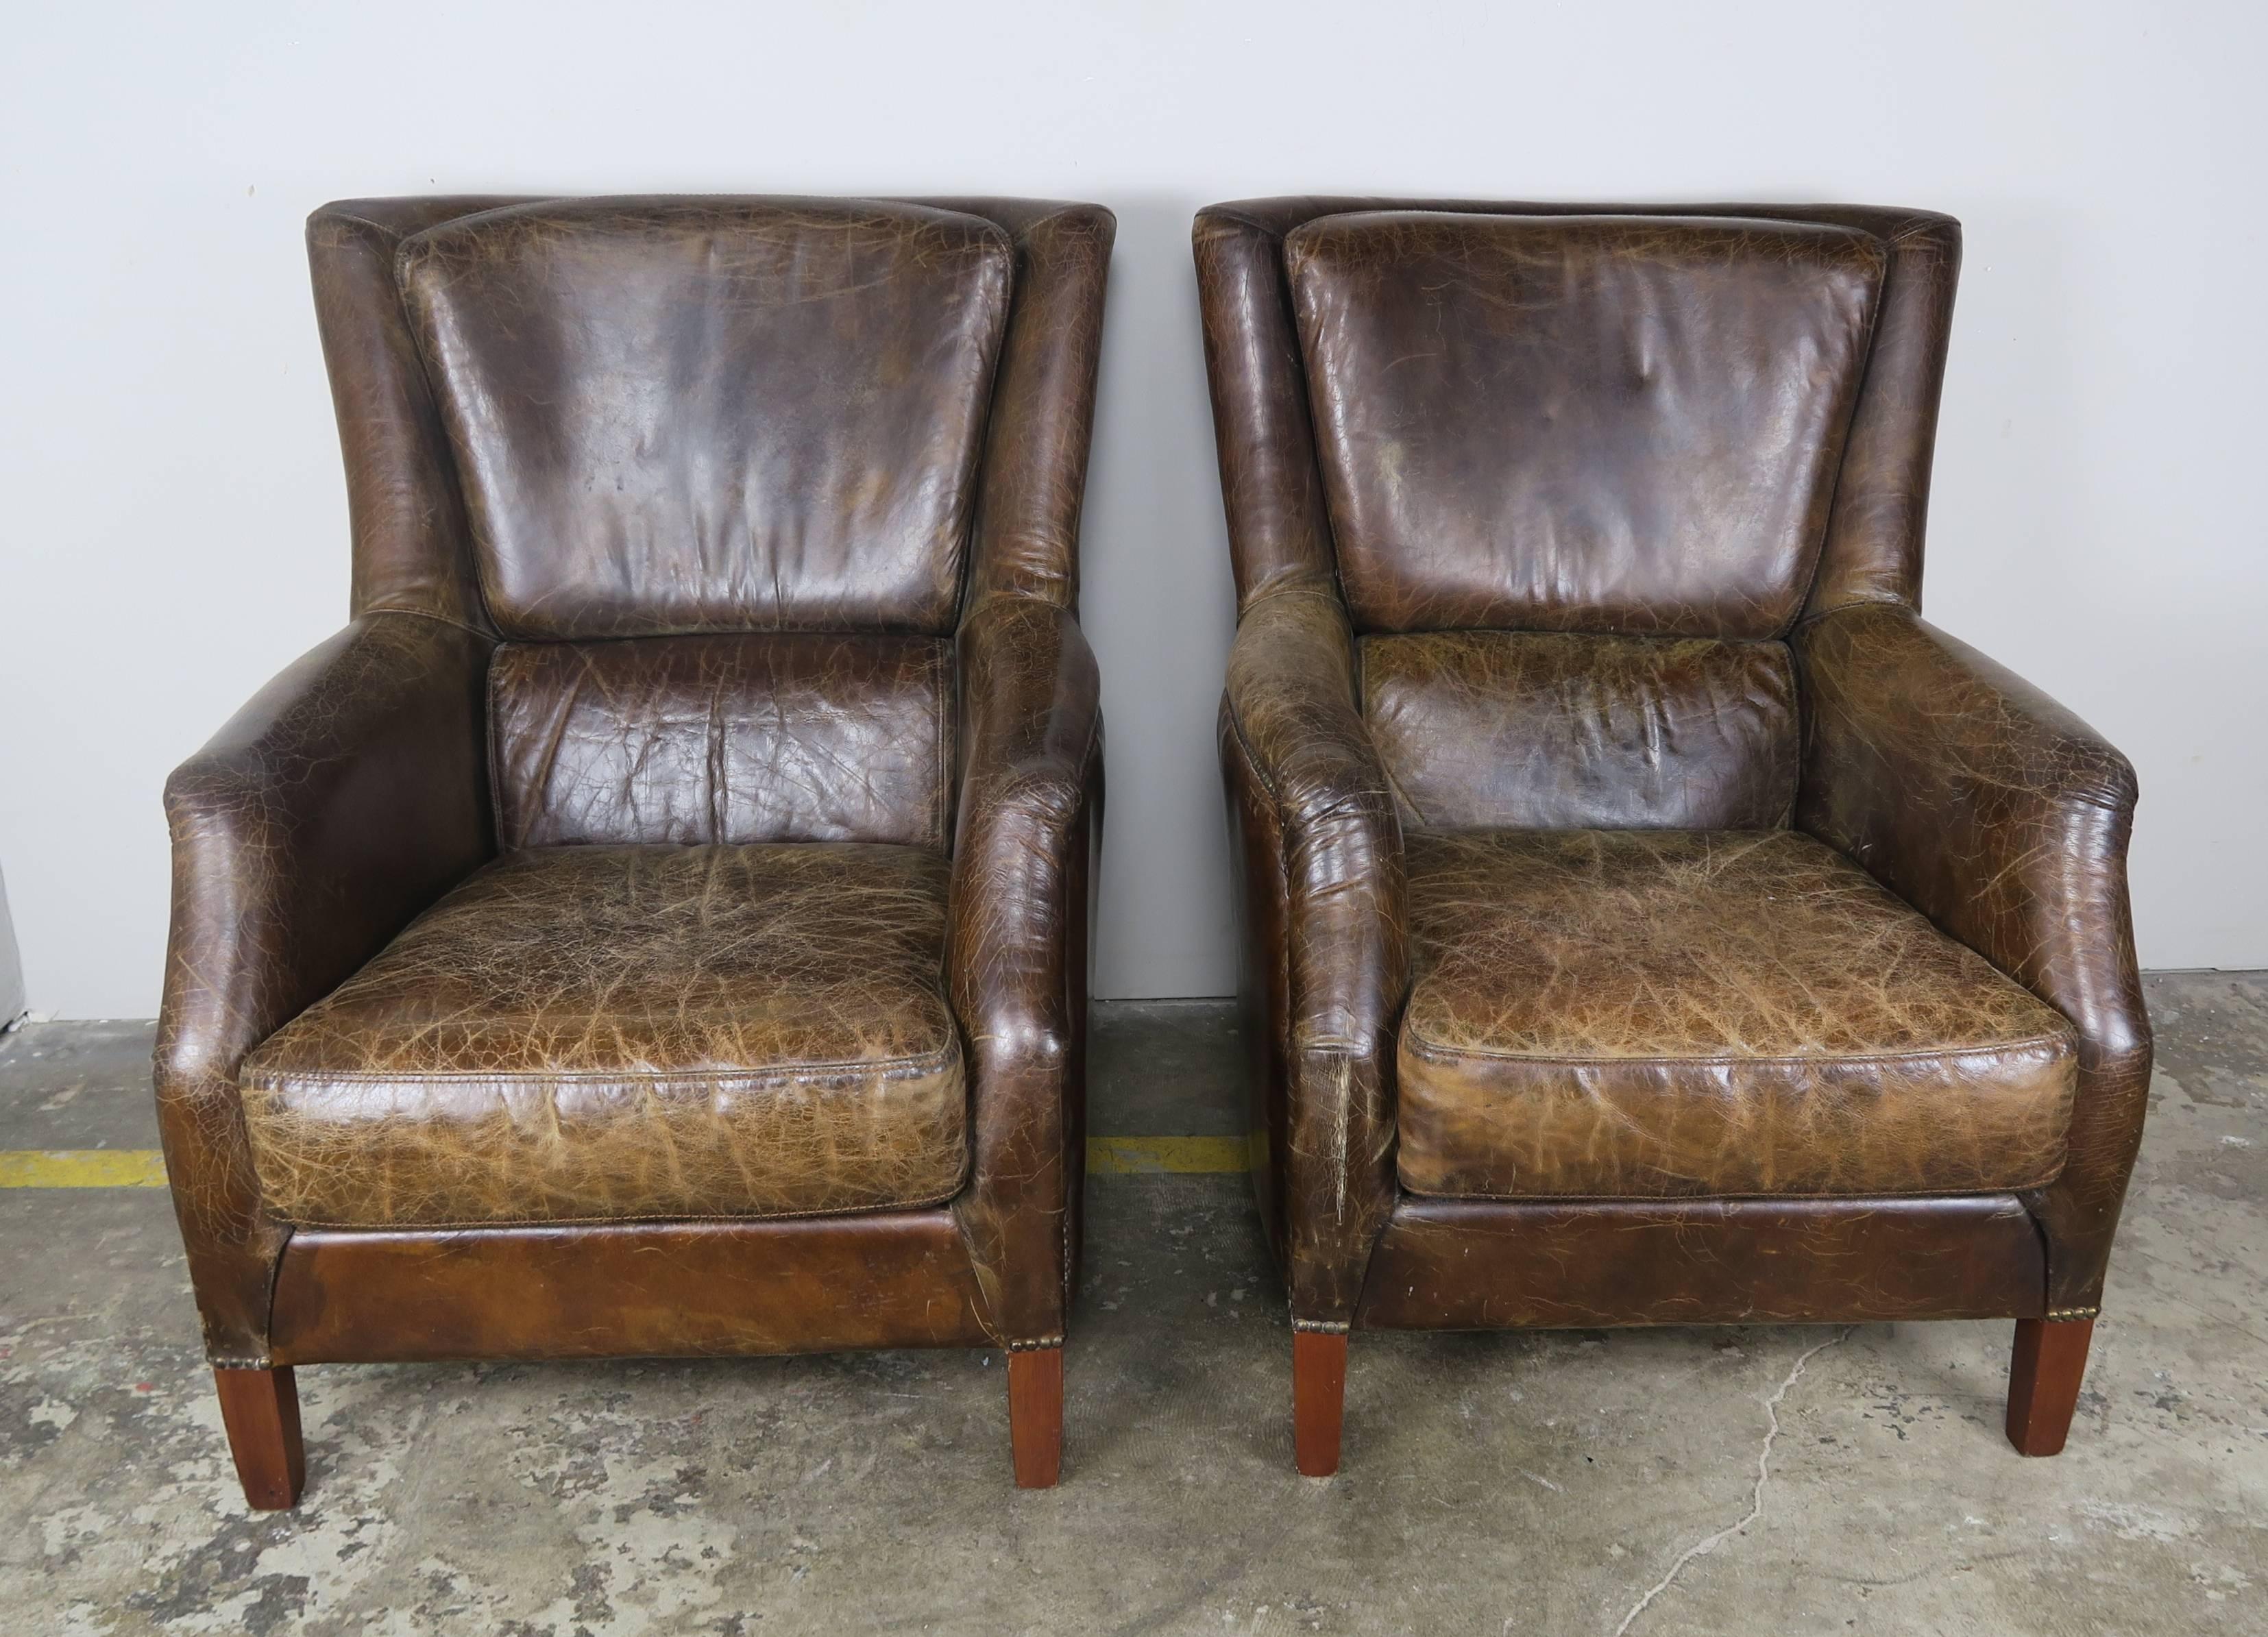 Pair of French deco style tobacco colored leather upholstered armchairs with loose seat cushions and nailhead trim detail. The armchairs stand on four walnut straight tapered legs.